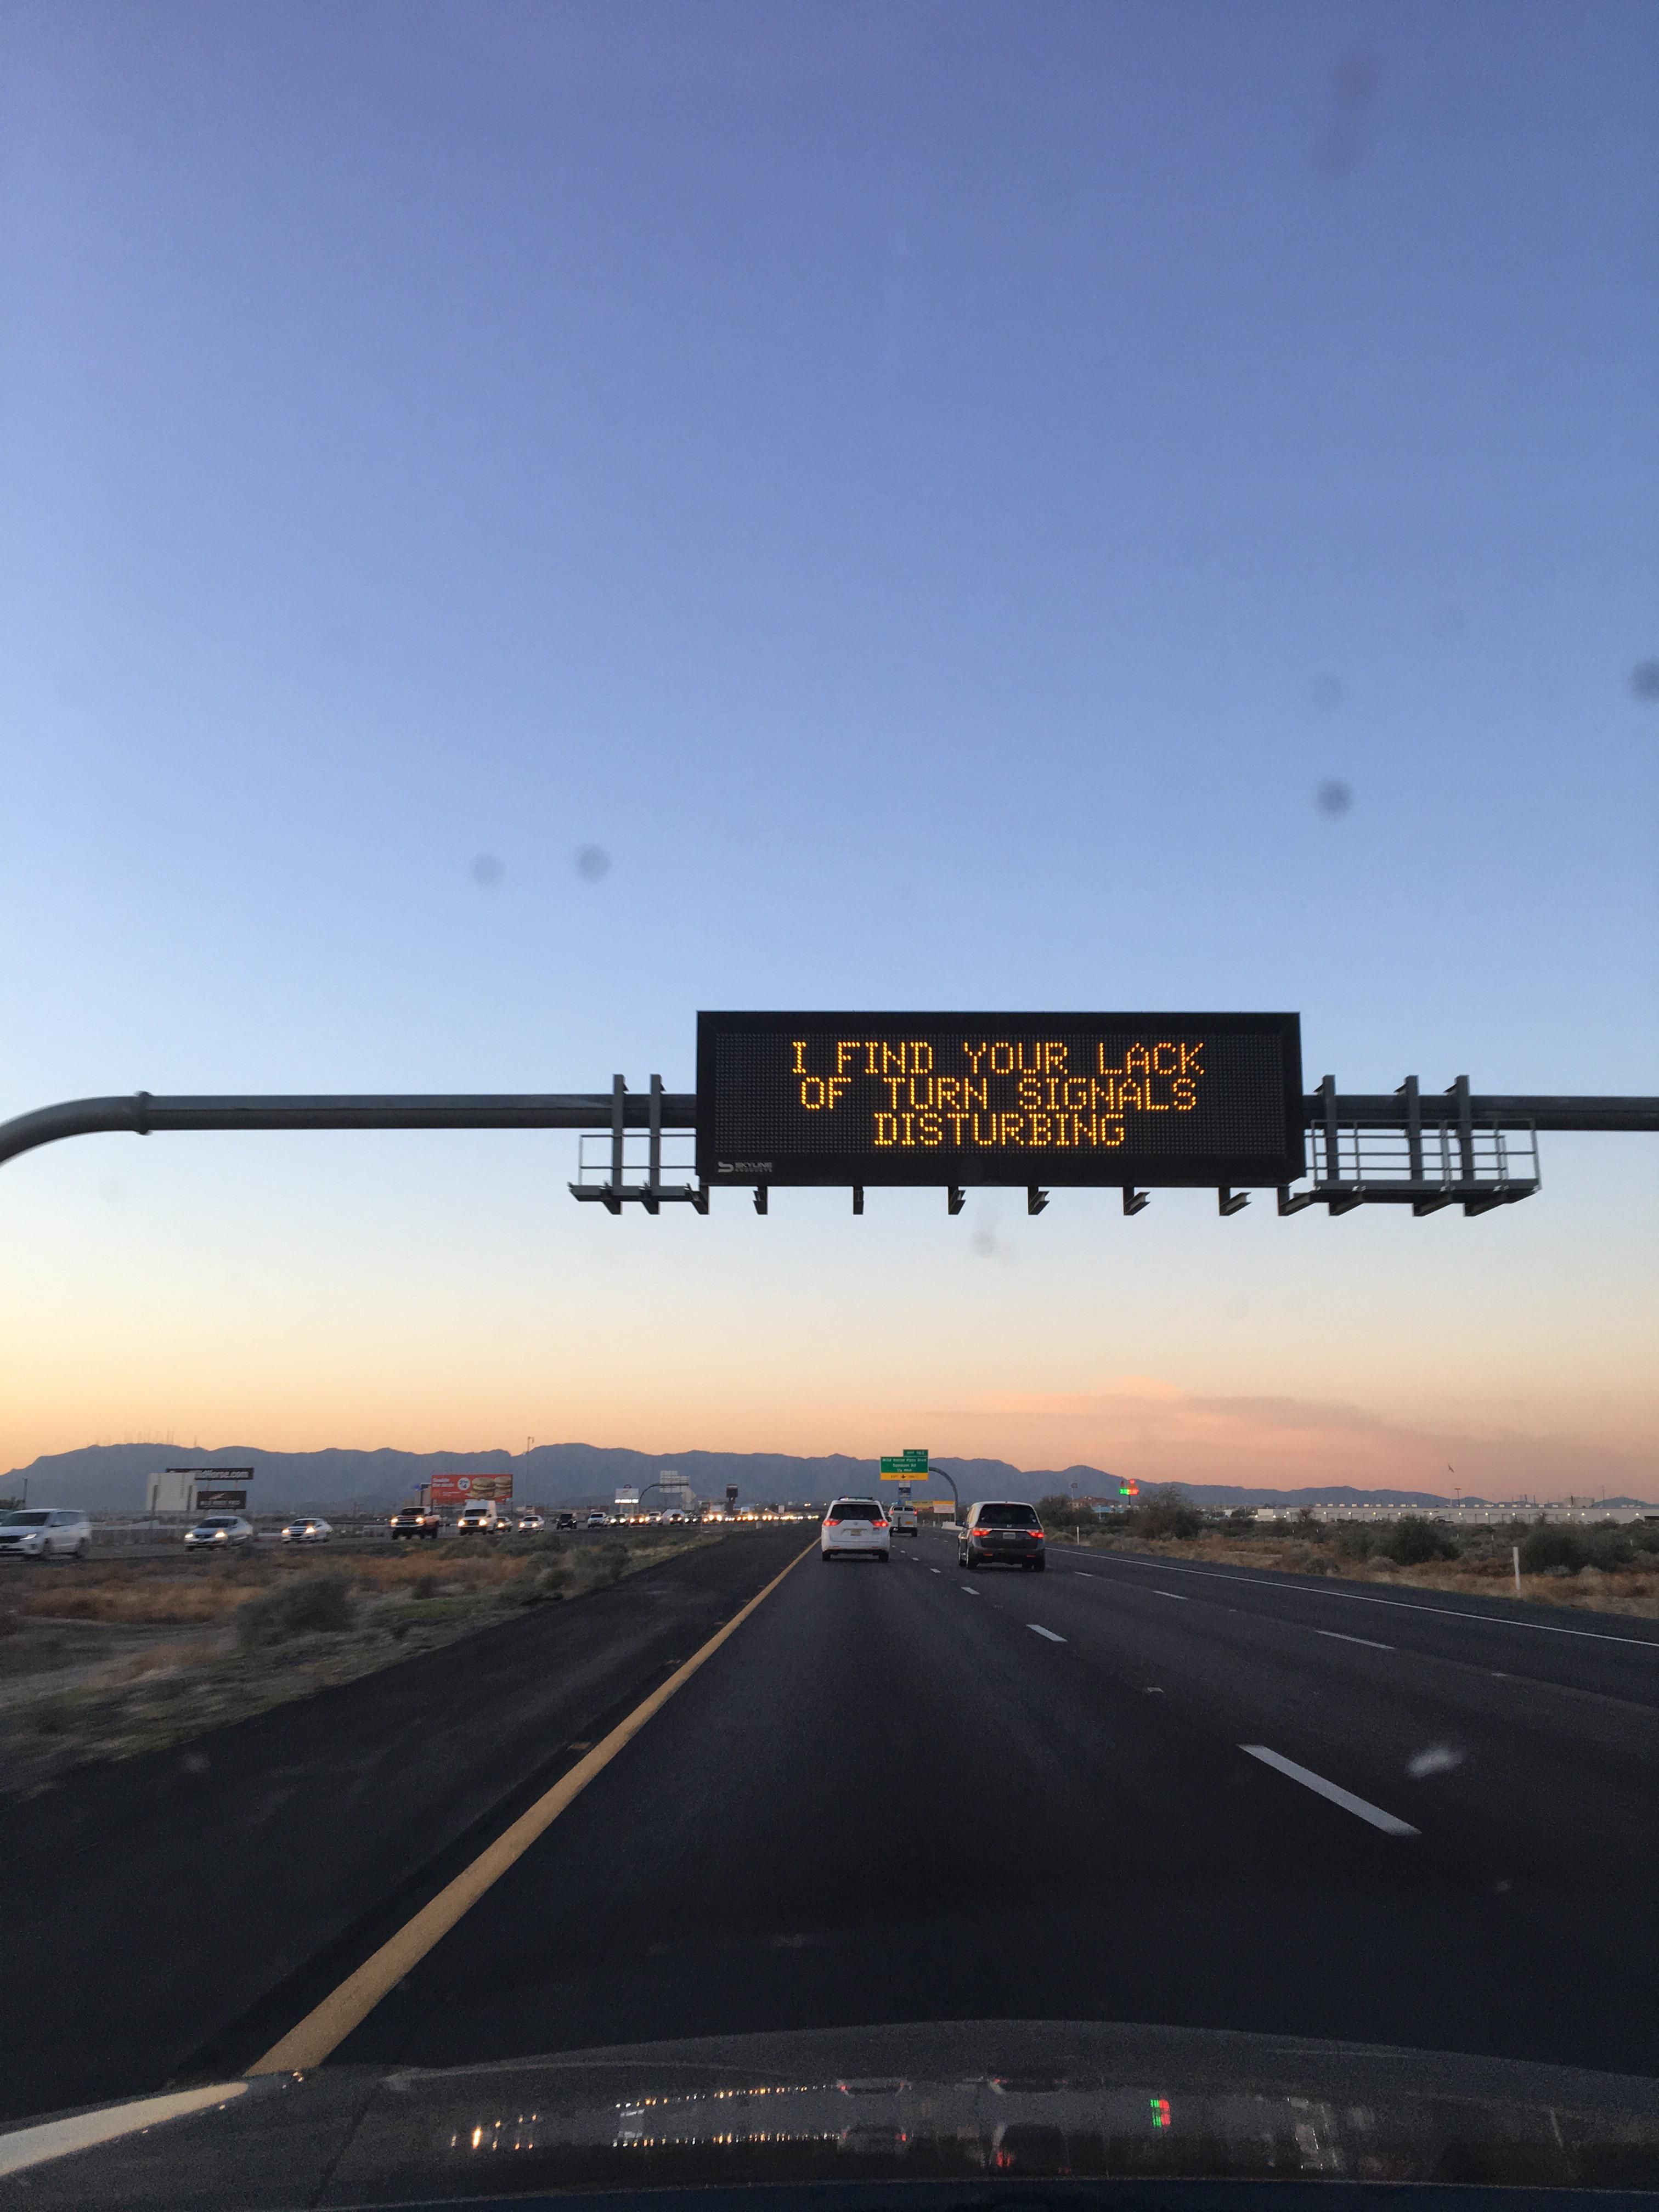 Arizona Department of Transportation has been seduced by the dark side!